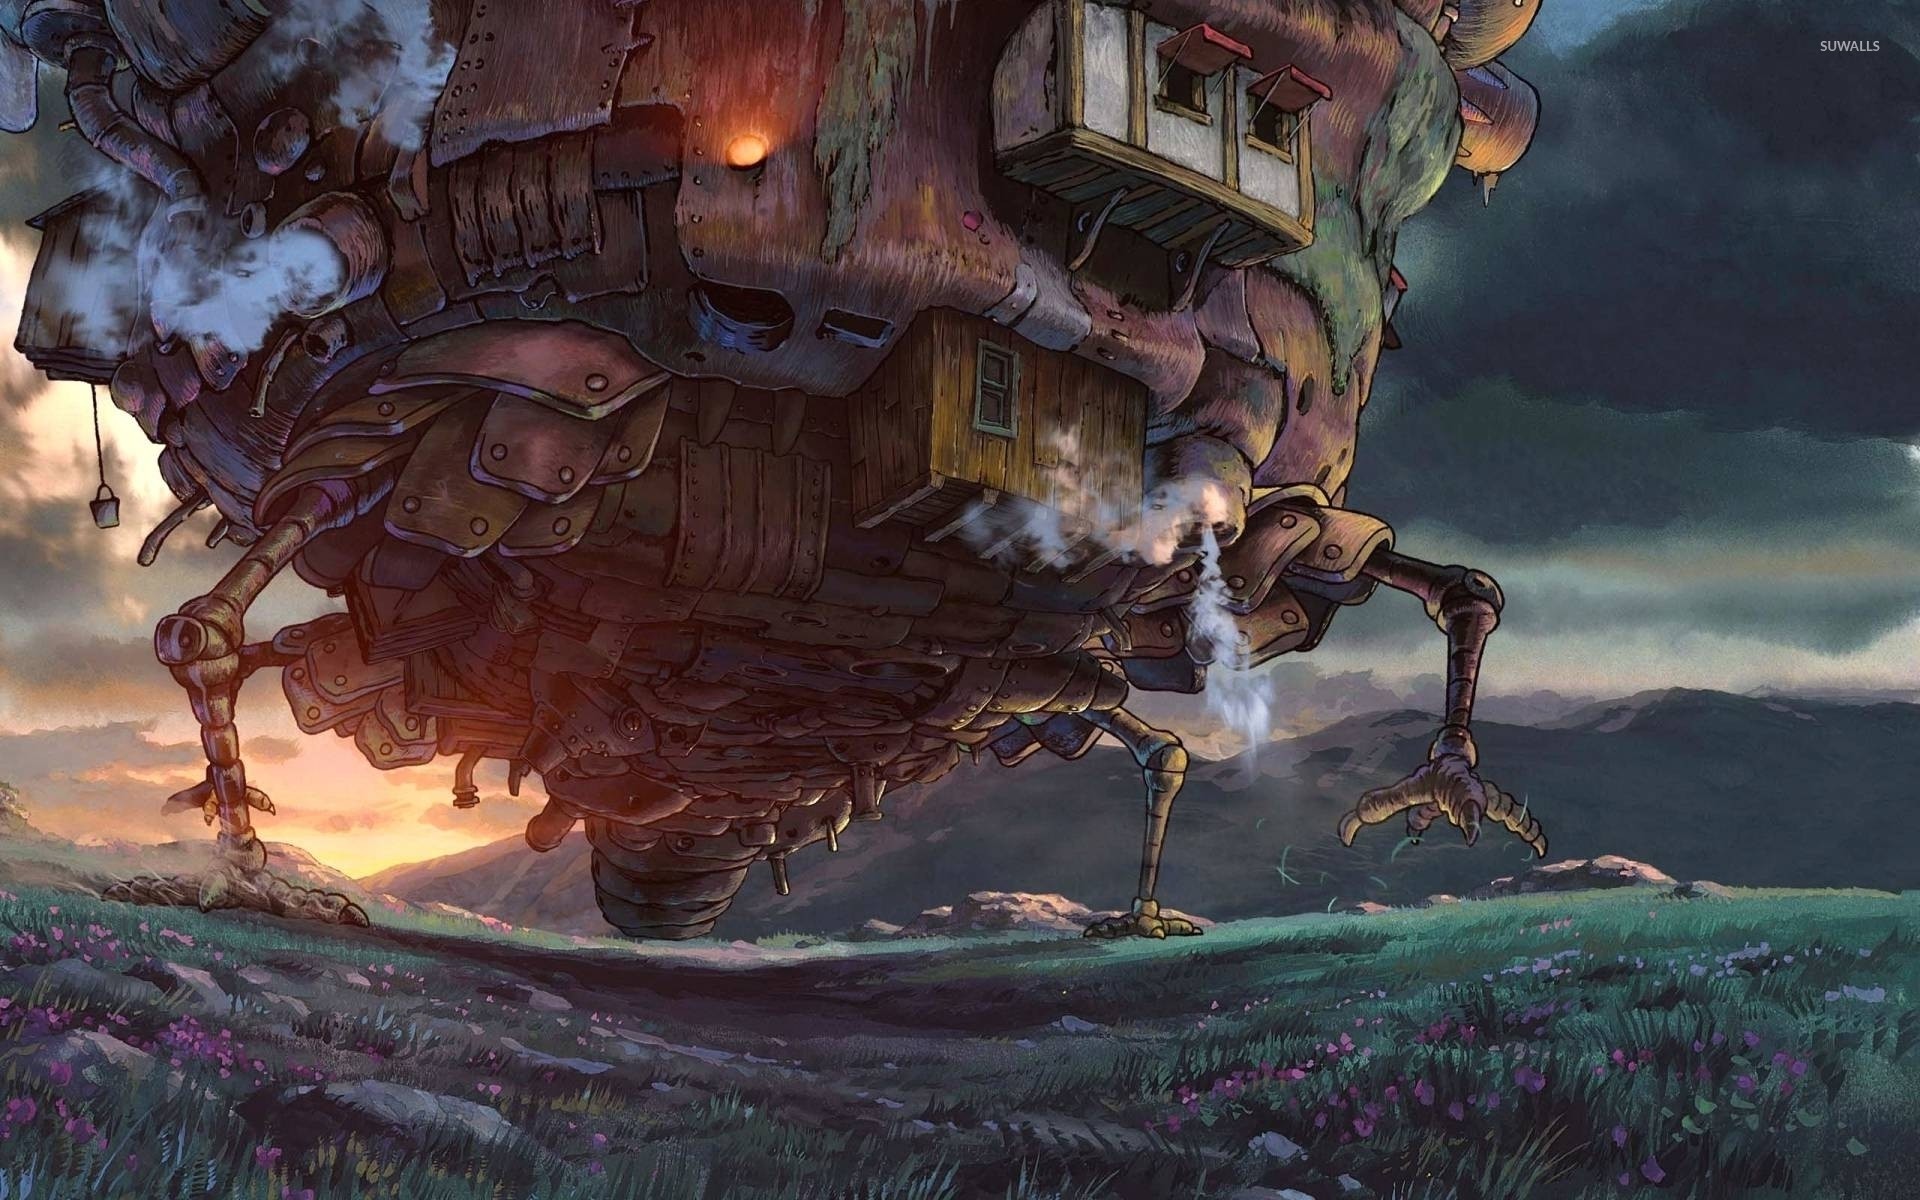 howl's moving castle wallpaper,action adventure game,cg artwork,adventure game,mythology,pc game